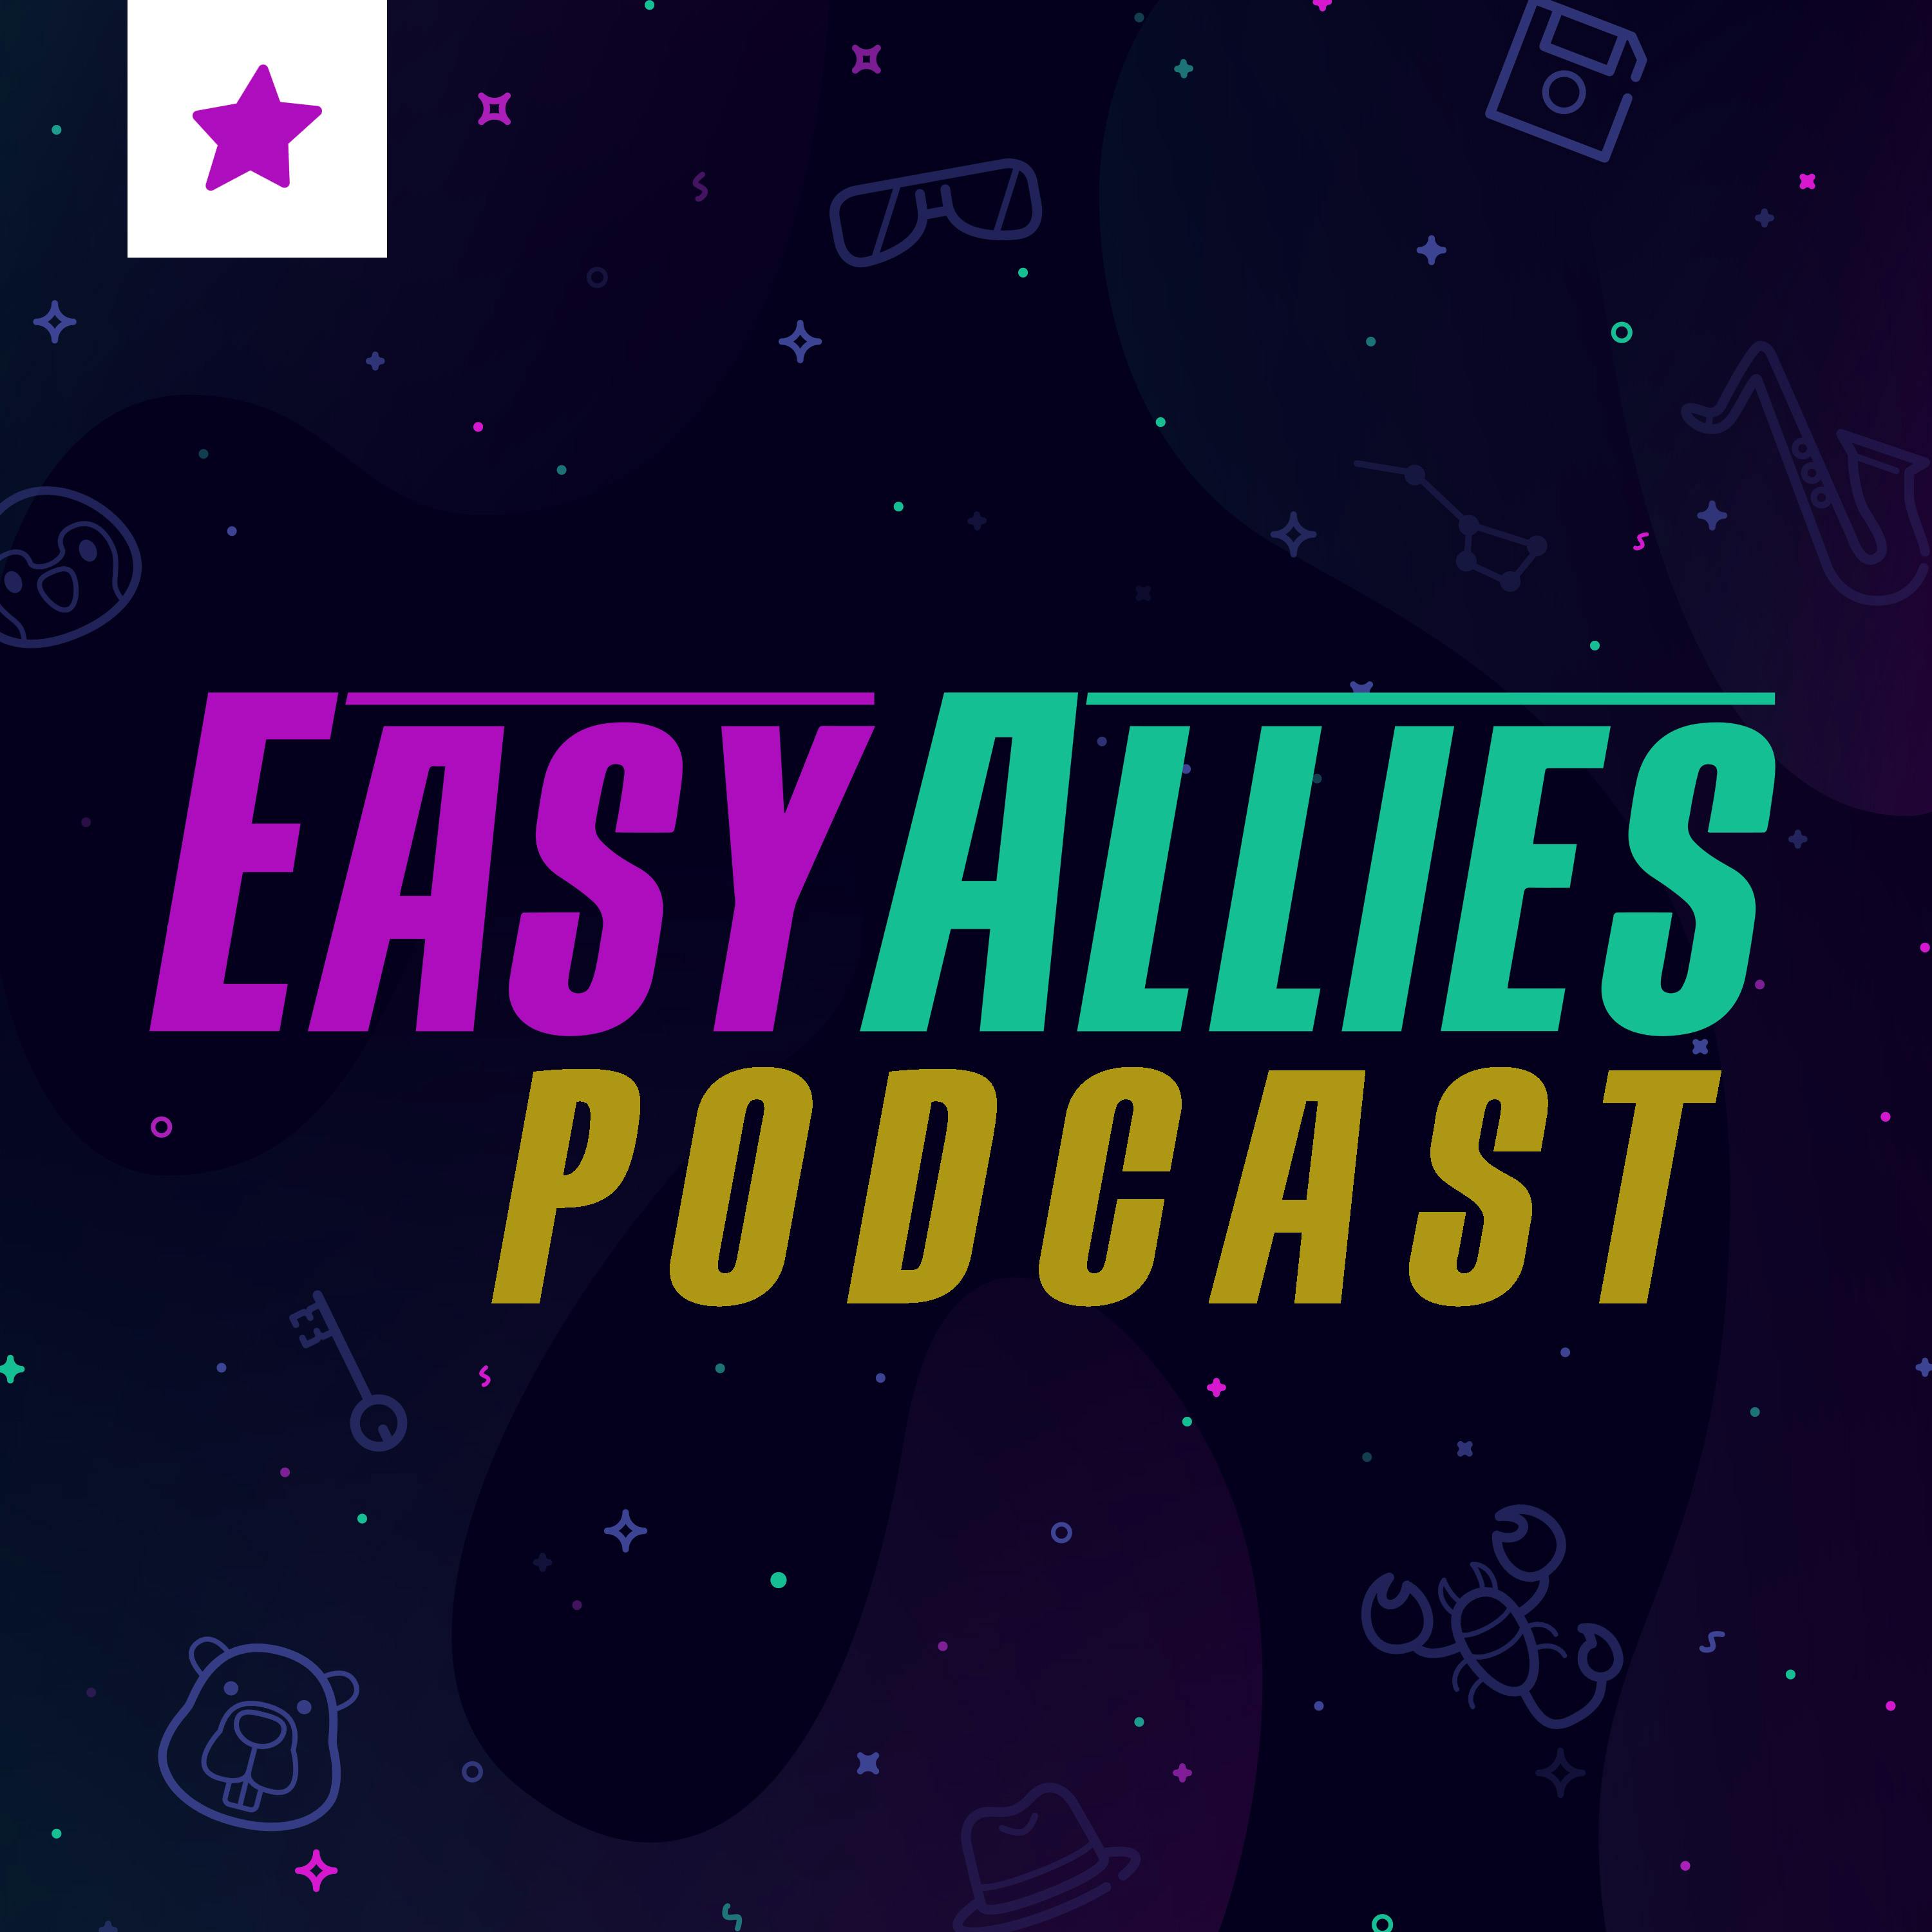 Lorelei and the Laser Eyes and the Leviathan - Easy Allies Podcast - Apr 19, 2024